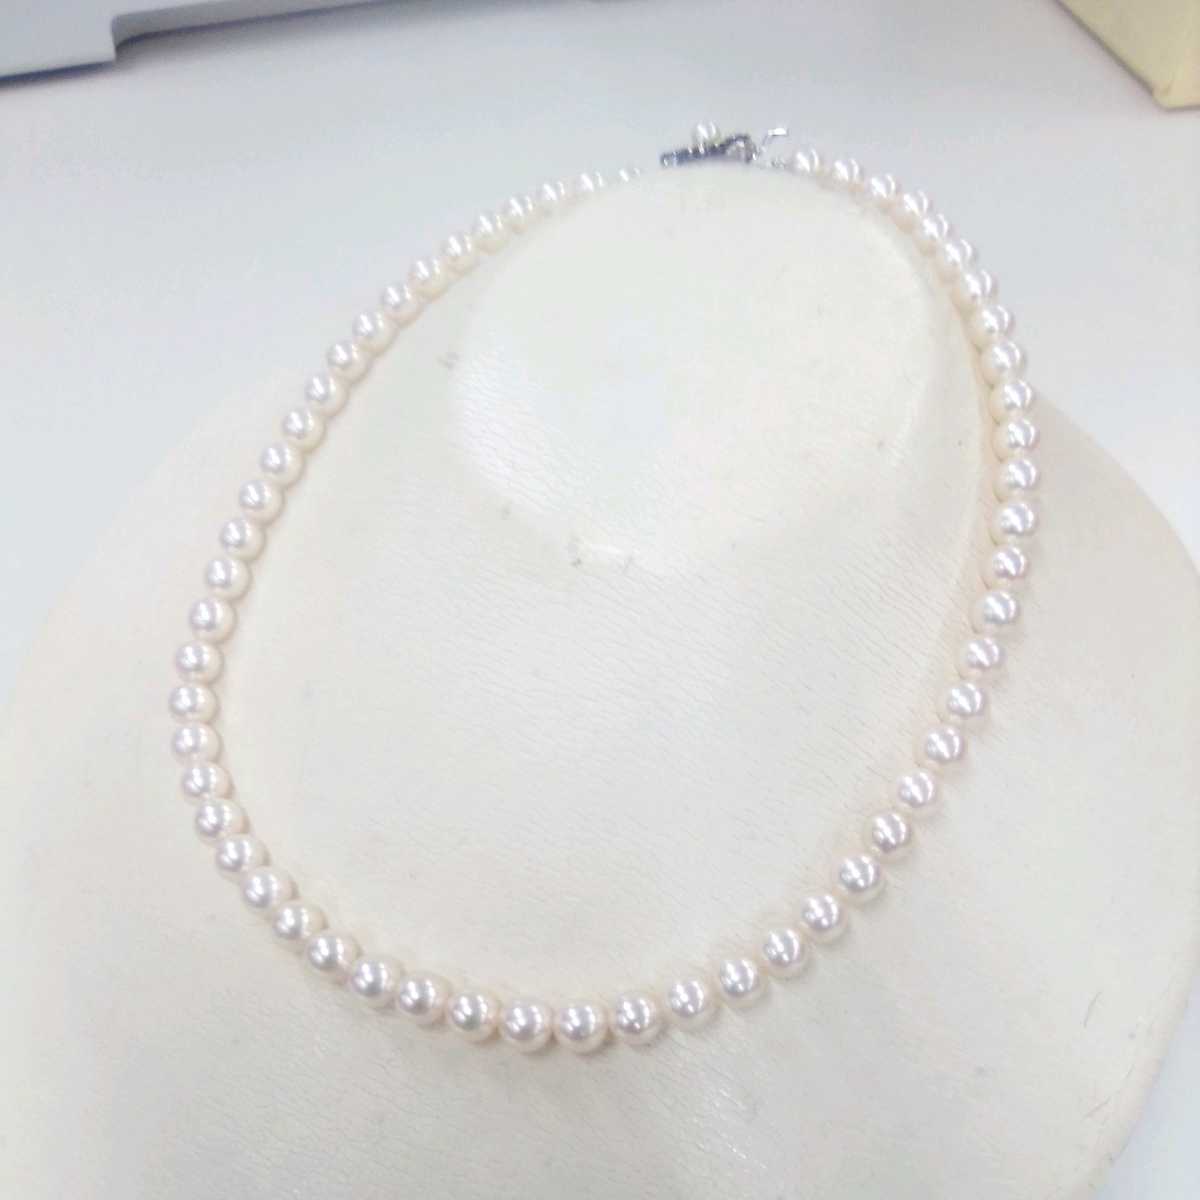 * is 3350H*...book@ pearl pearl necklace 40 centimeter 6.6-7 millimeter . rom and rear (before and after) catch SILVER stamp equipped * postage included *